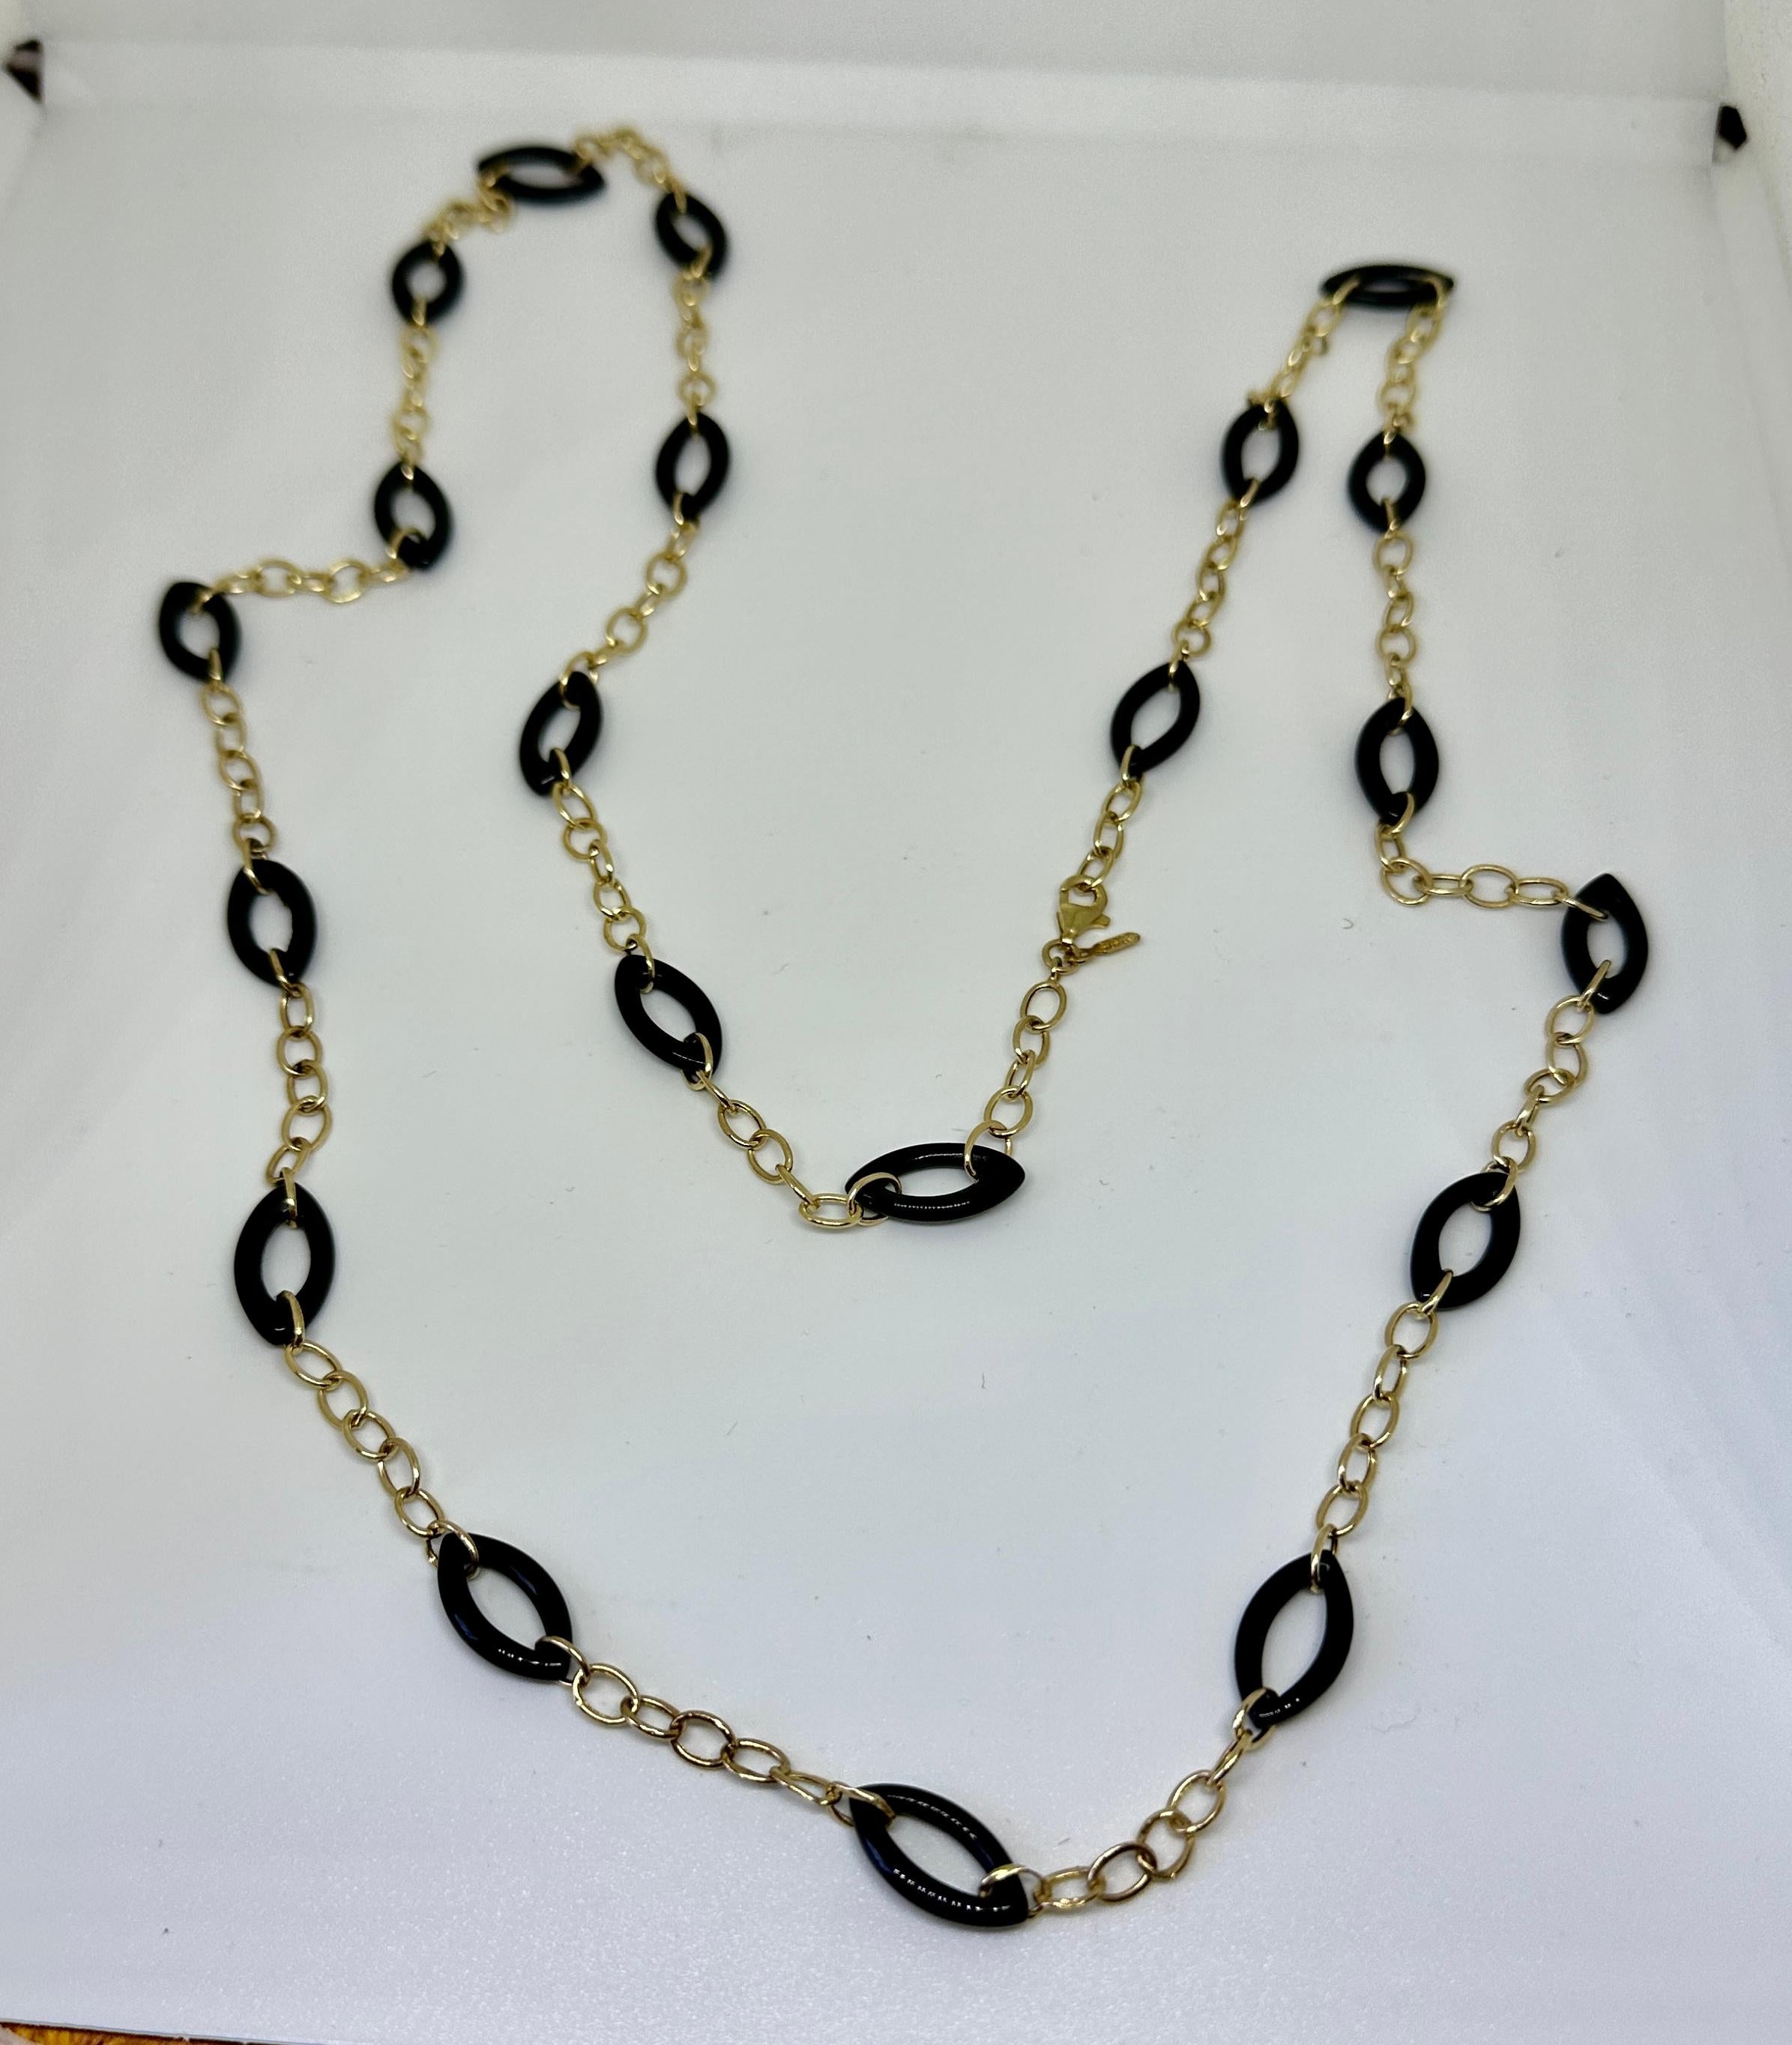 Black Coral 14 Karat Gold Necklace 36 Inches Chain Link Necklace For Sale 1